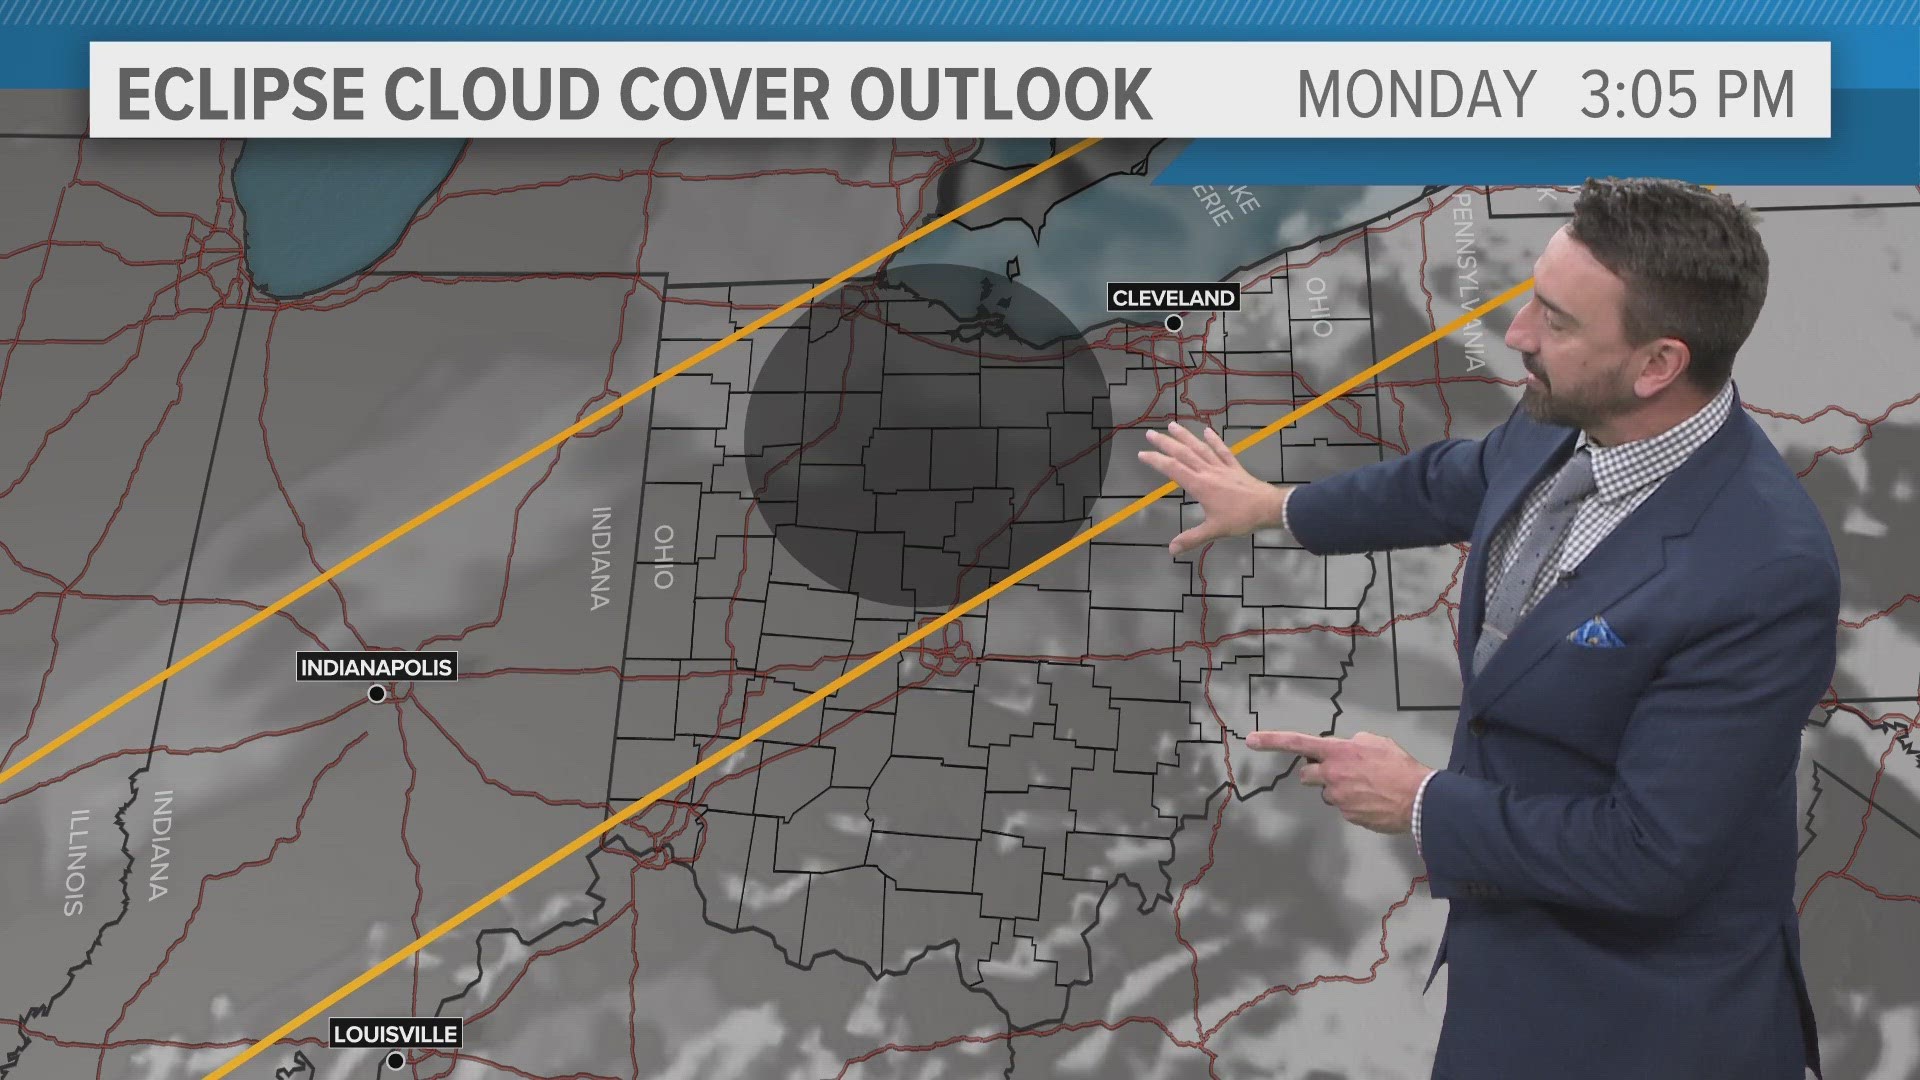 Here's a closer look at the weather conditions that you can expect the moment of the eclipse in Northeast Ohio.